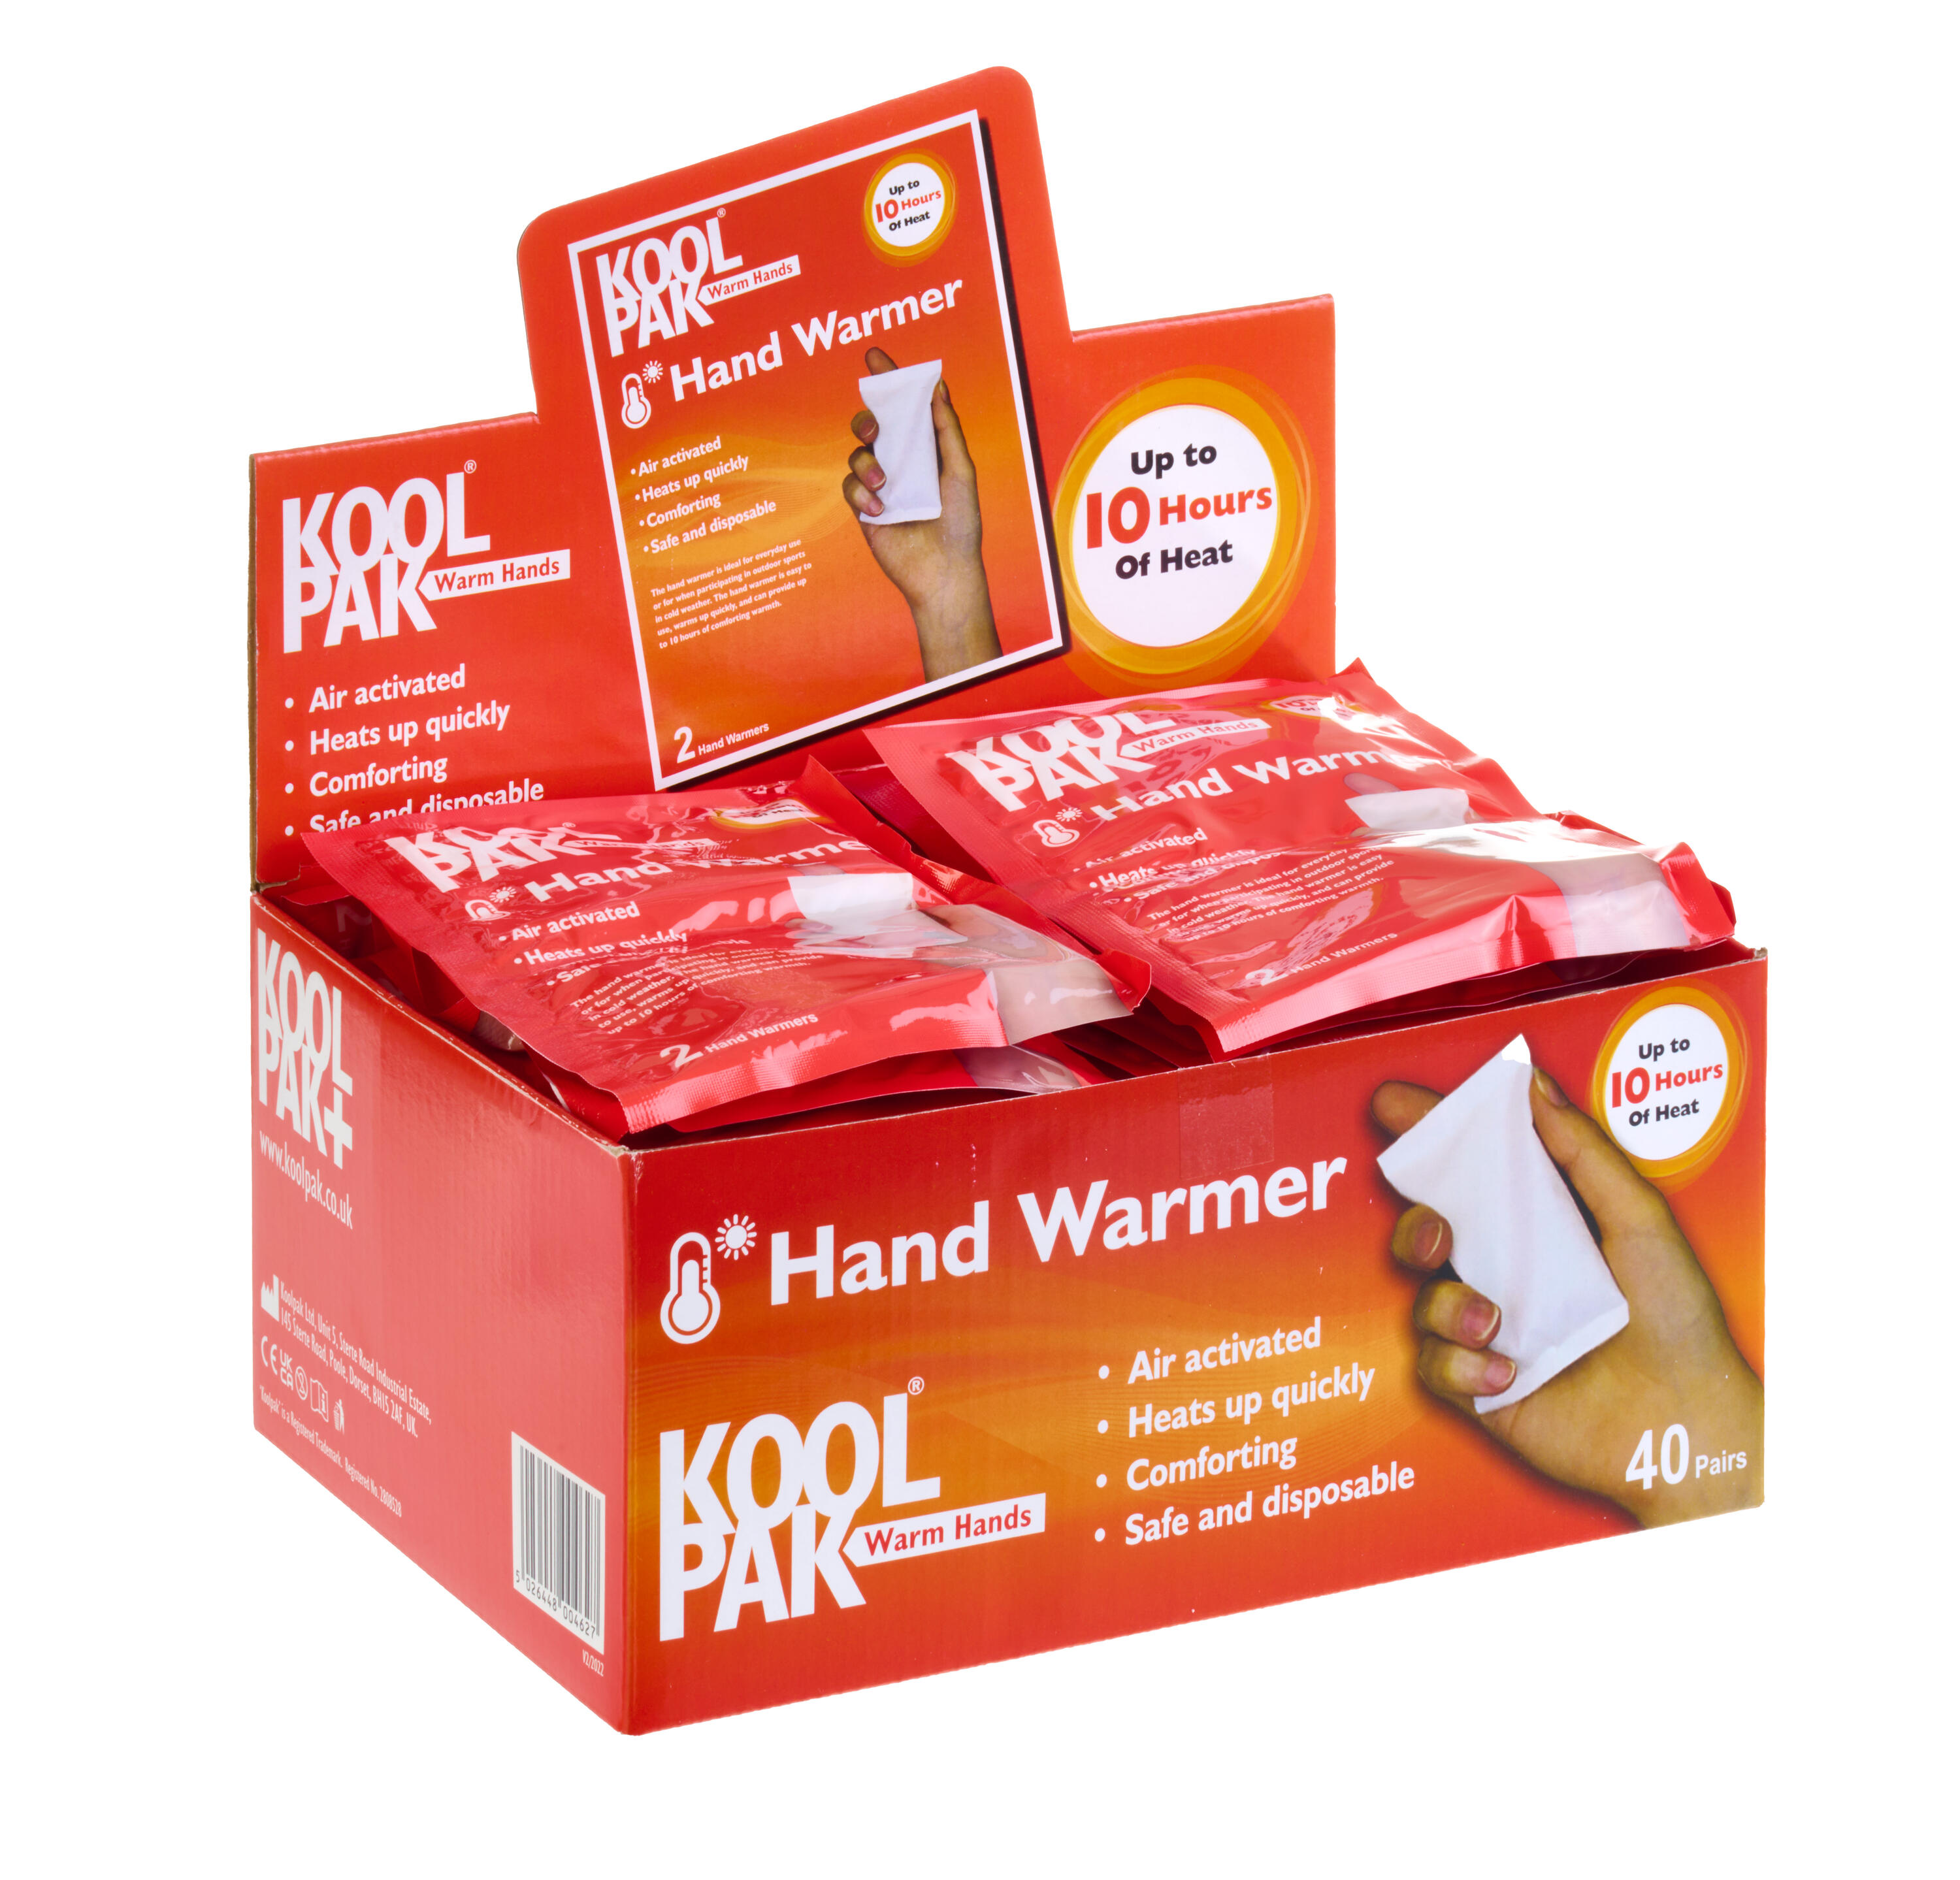 Koolpak Hand Warmer for Cold Weather - 2 Pack - Includes 40 Packs 1/6